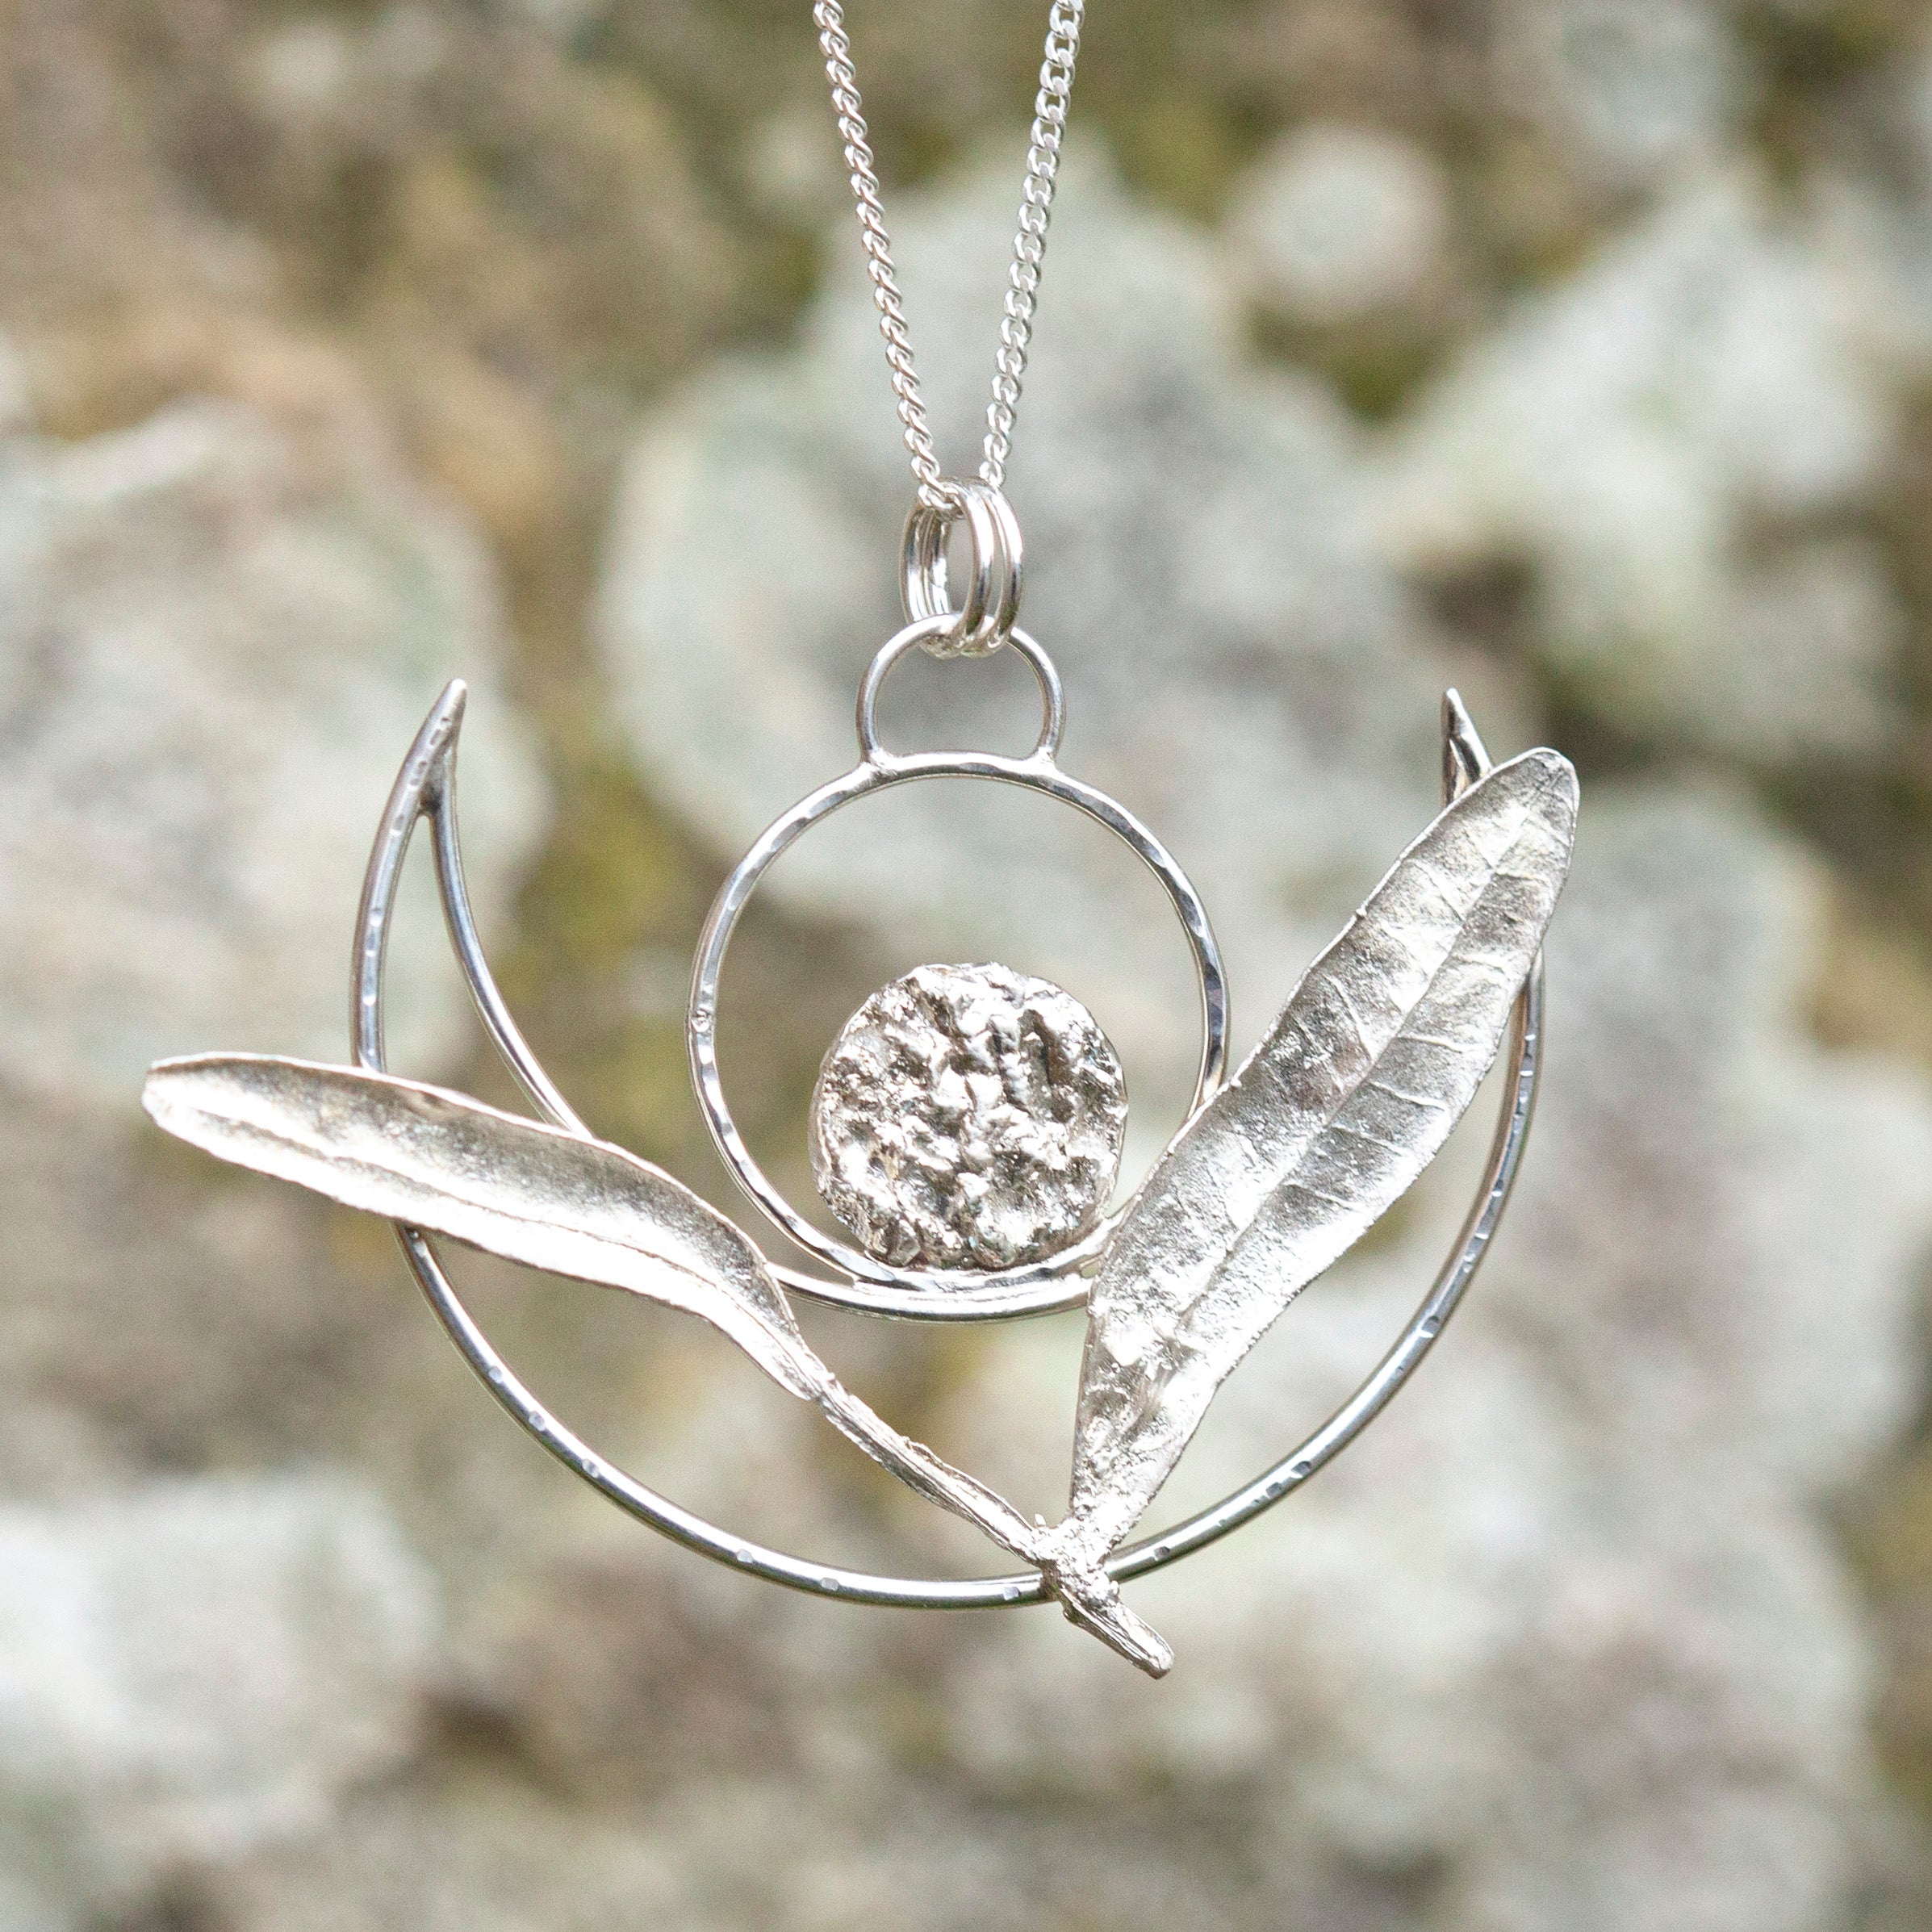 OOAK • Veritable leaf pendant in silver #1  (ready to ship)